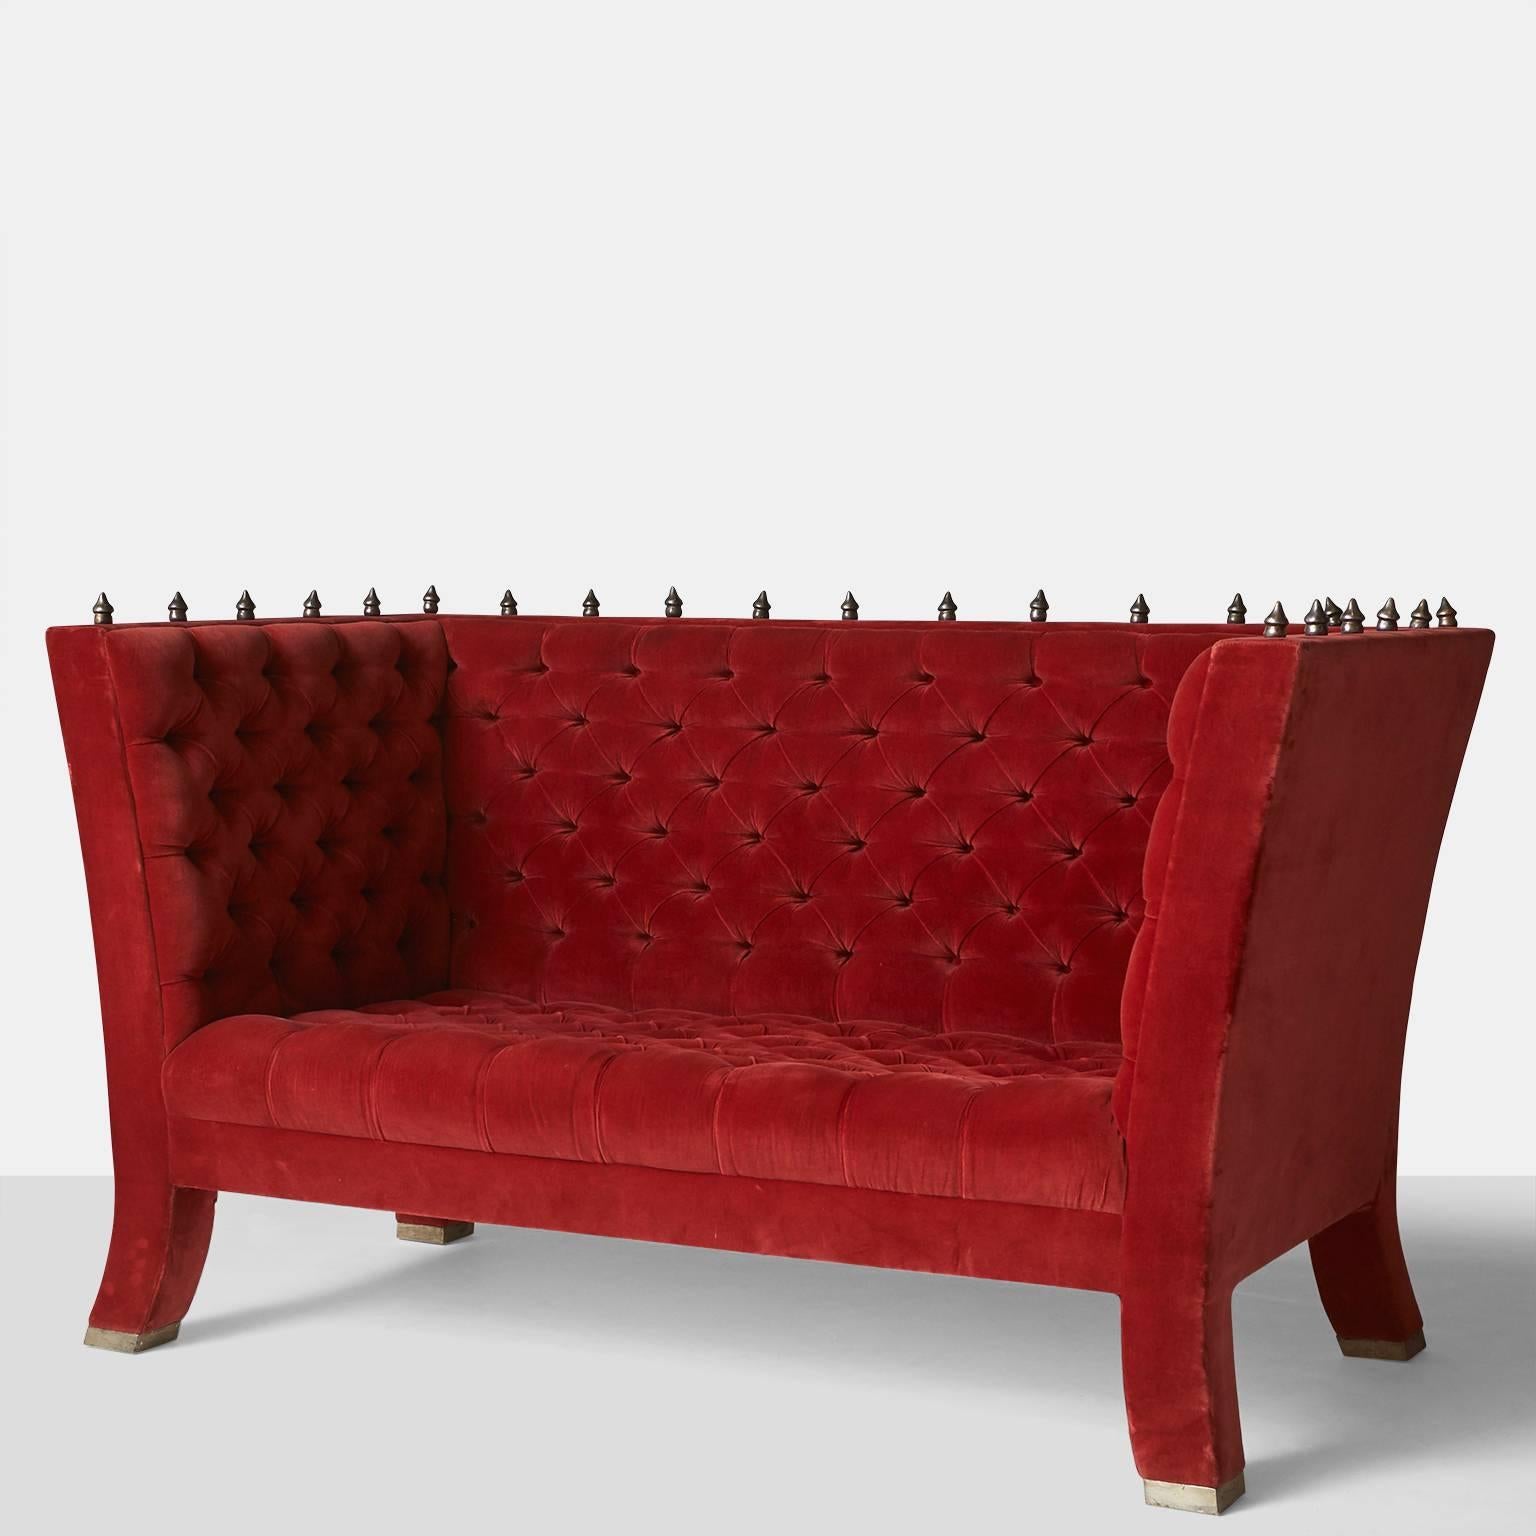 A pair of tufted sofas in red velvet with bronze Baroque finials lining the top edge and legs terminating with silver plated caps. A similar model is in the Pompidou Center in Paris. Manufactured by BGH Editions, Paris, circa 1989.

Literature: